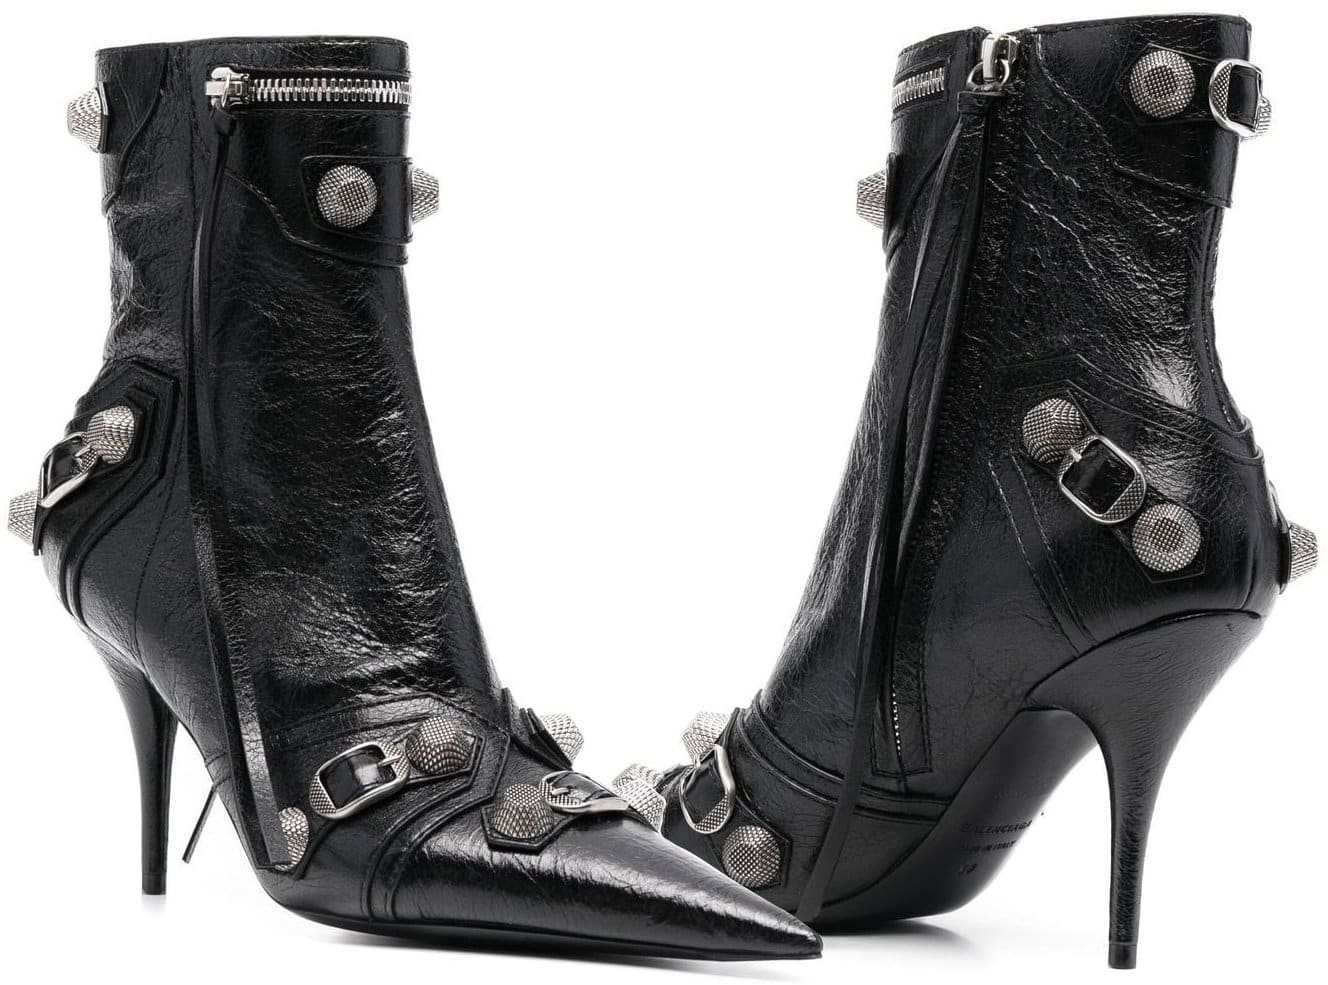 Balenciaga's Cagole boots have a crinkled finish, toughened with silver-tone stud detailing